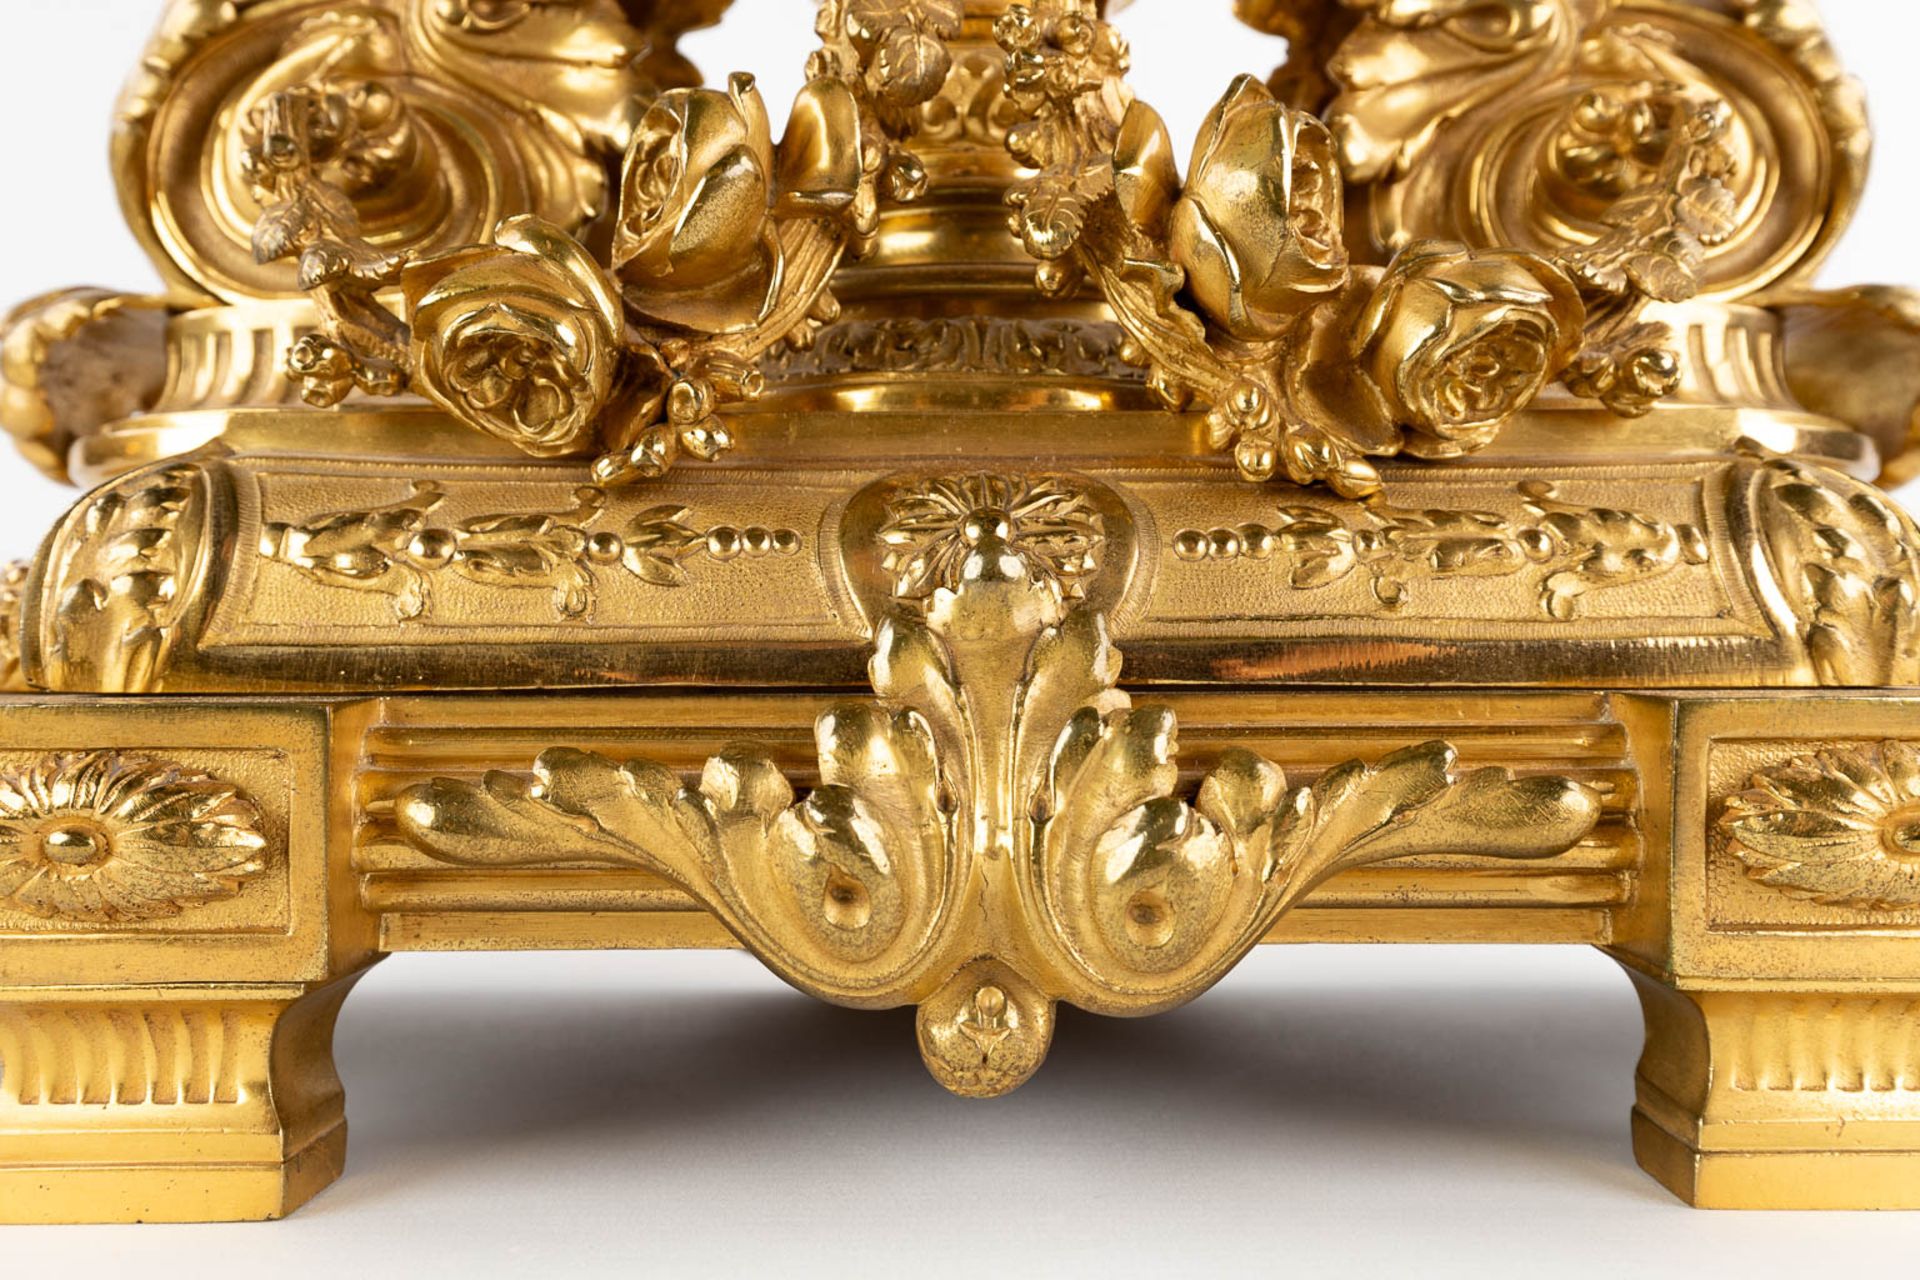 A three-piece mantle garniture clock and candelabra, gilt bronze in a Louis XVI style, 19th C. (D:19 - Image 19 of 19